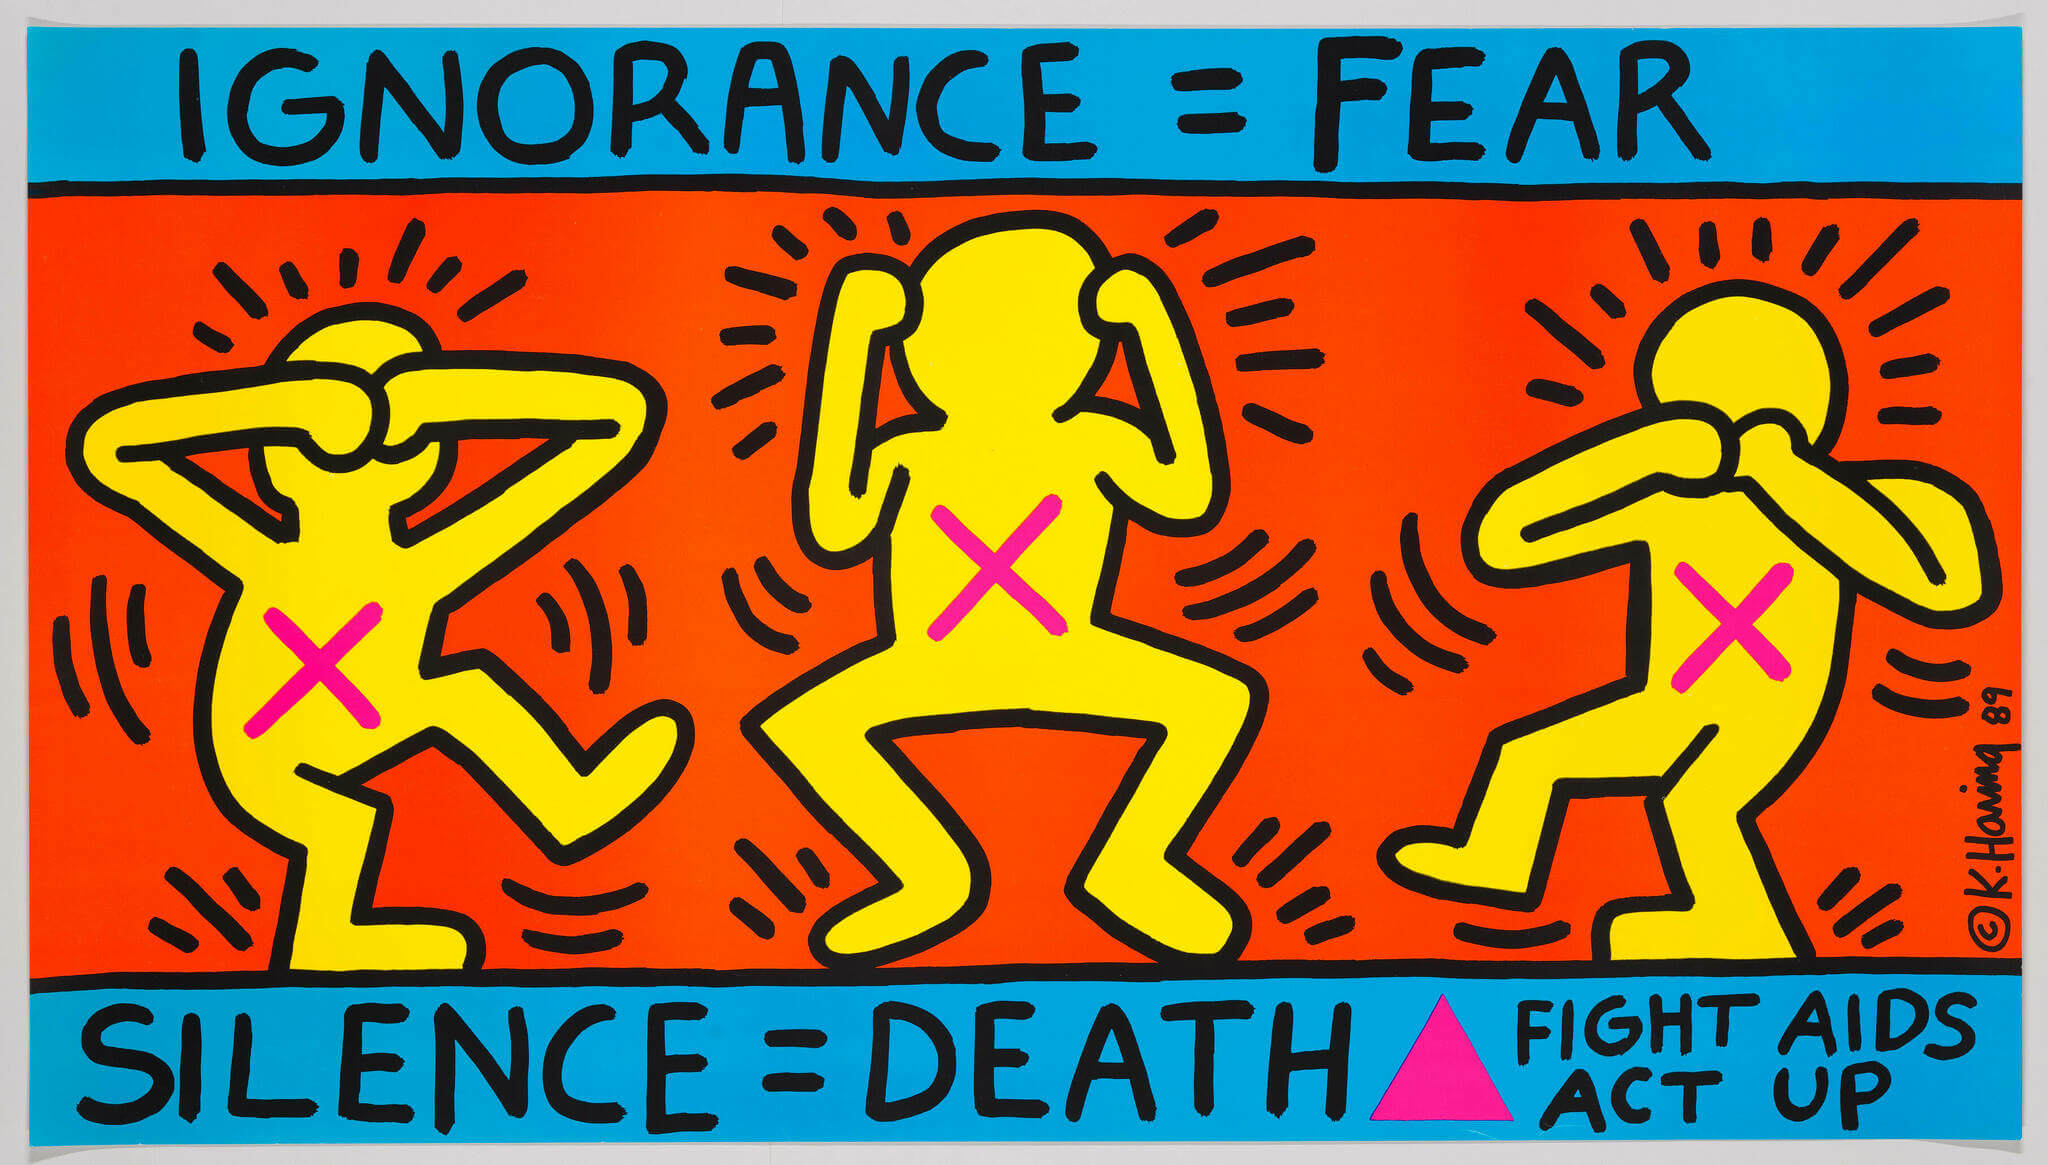 Image of Ignorance = Fear / Silence = Death by Keith Haring